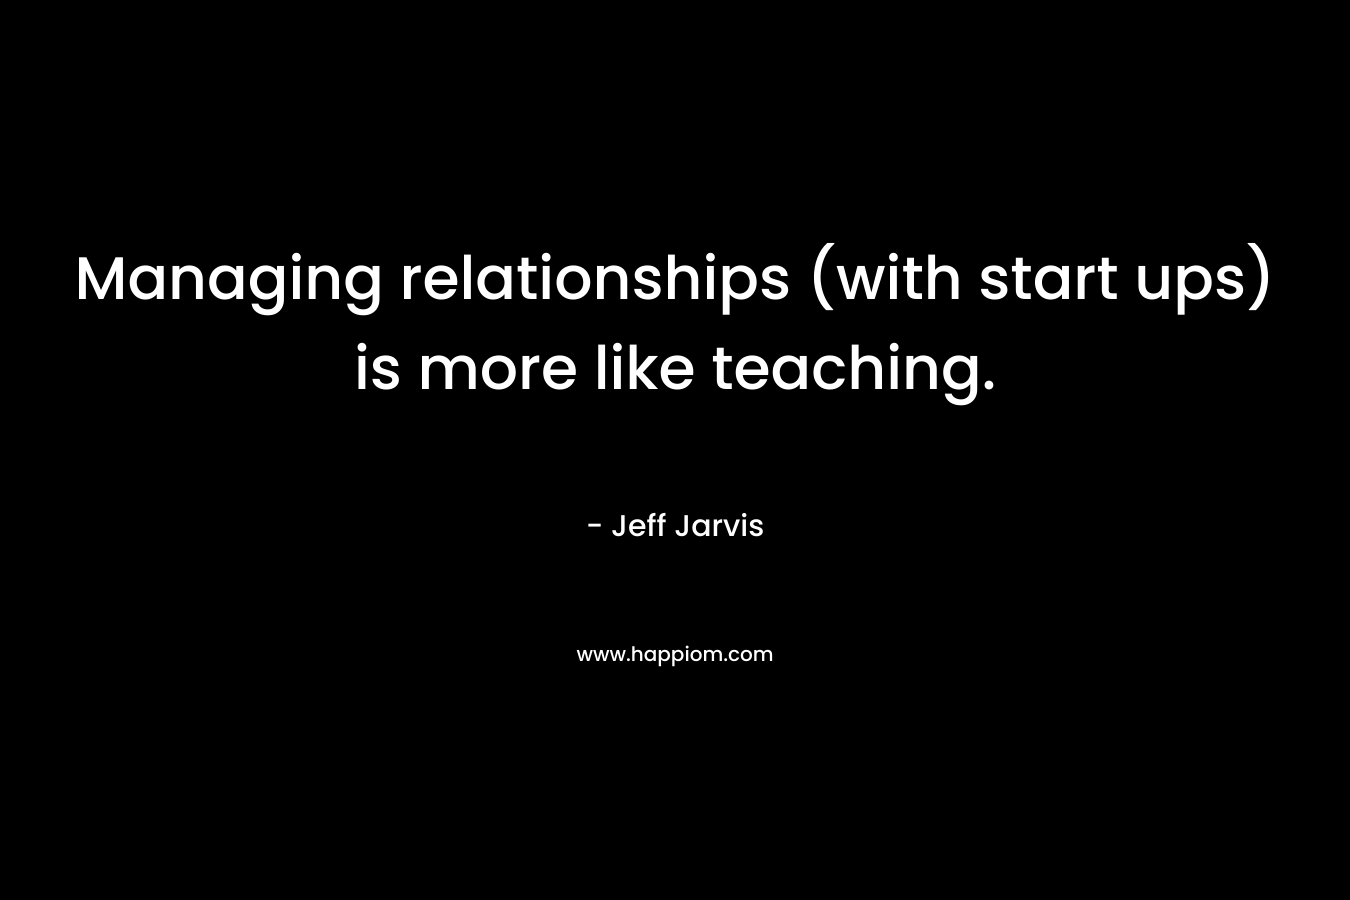 Managing relationships (with start ups) is more like teaching.